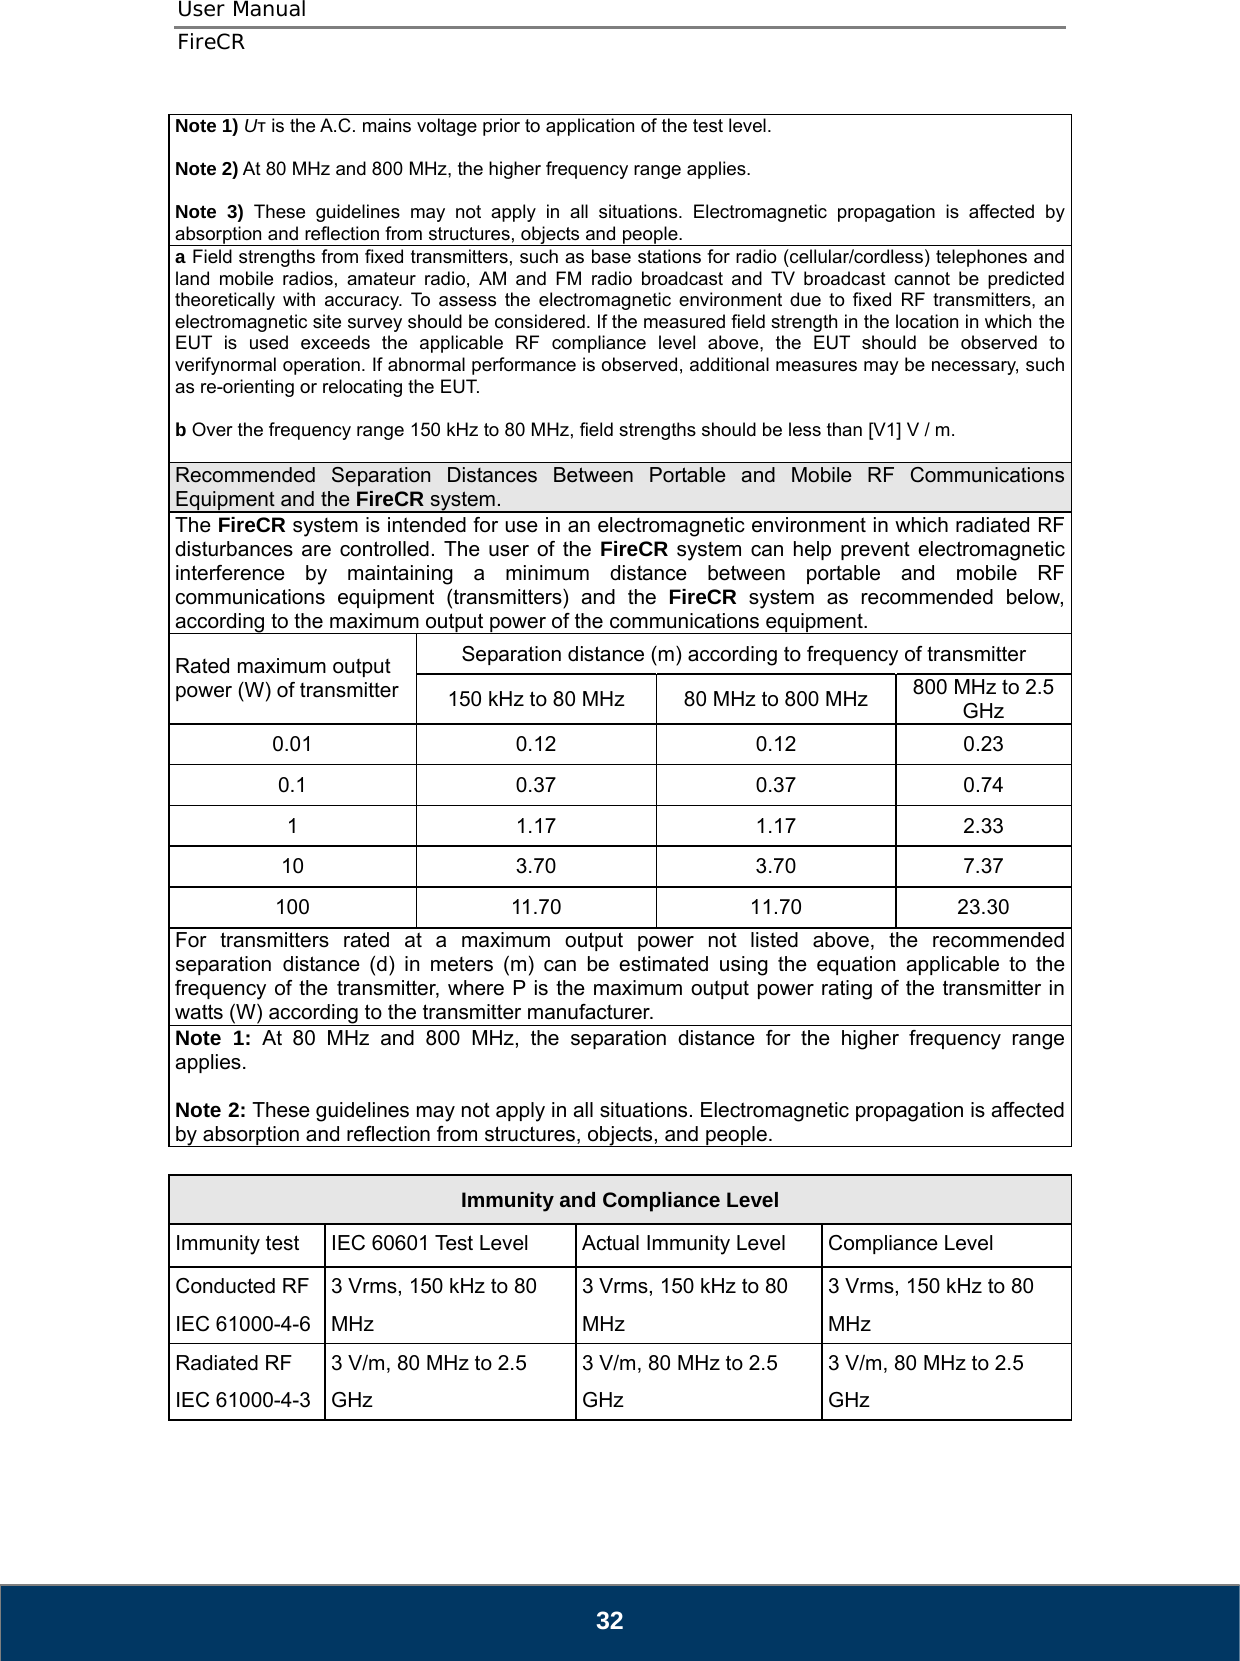 User Manual  FireCR Note 1) Uт is the A.C. mains voltage prior to application of the test level.  Note 2) At 80 MHz and 800 MHz, the higher frequency range applies.  Note 3) These guidelines may not apply in all situations. Electromagnetic propagation is affected by absorption and reflection from structures, objects and people. a Field strengths from fixed transmitters, such as base stations for radio (cellular/cordless) telephones and land mobile radios, amateur radio, AM and FM radio broadcast and TV broadcast cannot be predicted theoretically with accuracy. To assess the electromagnetic environment due to fixed RF transmitters, an electromagnetic site survey should be considered. If the measured field strength in the location in which the EUT is used exceeds the applicable RF compliance level above, the EUT should be observed to verifynormal operation. If abnormal performance is observed, additional measures may be necessary, such as re-orienting or relocating the EUT.  b Over the frequency range 150 kHz to 80 MHz, field strengths should be less than [V1] V / m.  Recommended Separation Distances Between Portable and Mobile RF Communications Equipment and the FireCR system. The FireCR system is intended for use in an electromagnetic environment in which radiated RF disturbances are controlled. The user of the FireCR system can help prevent electromagnetic interference by maintaining a minimum distance between portable and mobile RF communications equipment (transmitters) and the FireCR system as recommended below, according to the maximum output power of the communications equipment. Rated maximum output power (W) of transmitter Separation distance (m) according to frequency of transmitter 150 kHz to 80 MHz  80 MHz to 800 MHz  800 MHz to 2.5 GHz 0.01 0.12 0.12 0.23 0.1 0.37 0.37 0.74 1 1.17 1.17 2.33 10 3.70 3.70 7.37 100 11.70 11.70 23.30 For transmitters rated at a maximum output power not listed above, the recommended separation distance (d) in meters (m) can be estimated using the equation applicable to the frequency of the transmitter, where P is the maximum output power rating of the transmitter in watts (W) according to the transmitter manufacturer. Note 1: At 80 MHz and 800 MHz, the separation distance for the higher frequency range applies.  Note 2: These guidelines may not apply in all situations. Electromagnetic propagation is affected by absorption and reflection from structures, objects, and people.   Immunity and Compliance Level Immunity test  IEC 60601 Test Level  Actual Immunity Level  Compliance Level Conducted RF IEC 61000-4-6 3 Vrms, 150 kHz to 80 MHz 3 Vrms, 150 kHz to 80 MHz 3 Vrms, 150 kHz to 80 MHz Radiated RF IEC 61000-4-3 3 V/m, 80 MHz to 2.5 GHz 3 V/m, 80 MHz to 2.5 GHz 3 V/m, 80 MHz to 2.5 GHz     32 